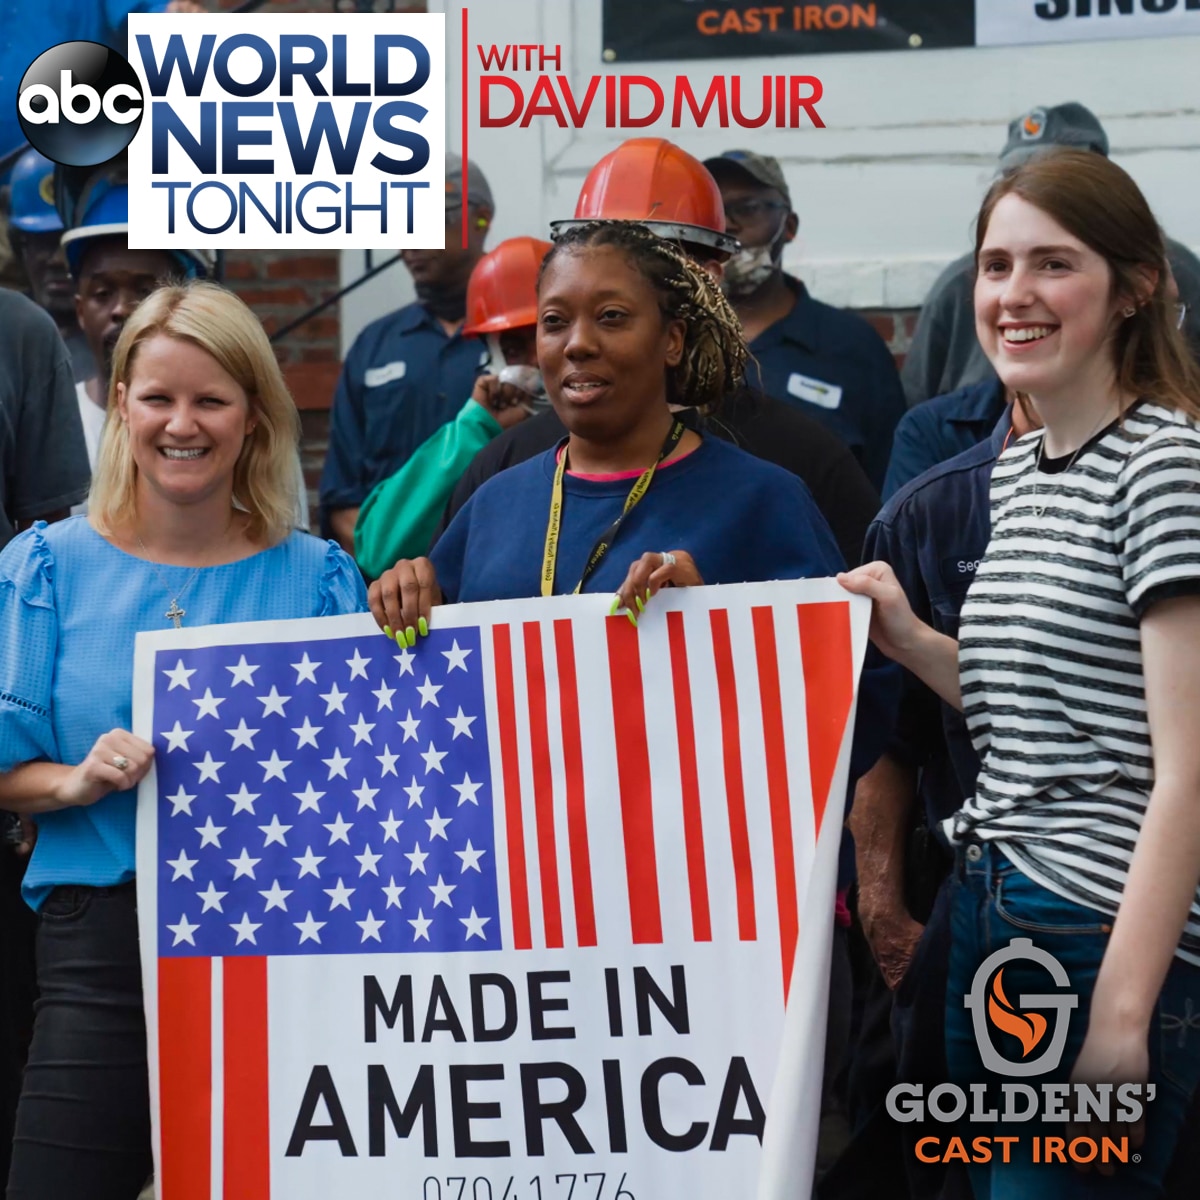 ABC Made in America - Goldens' Cast Iron